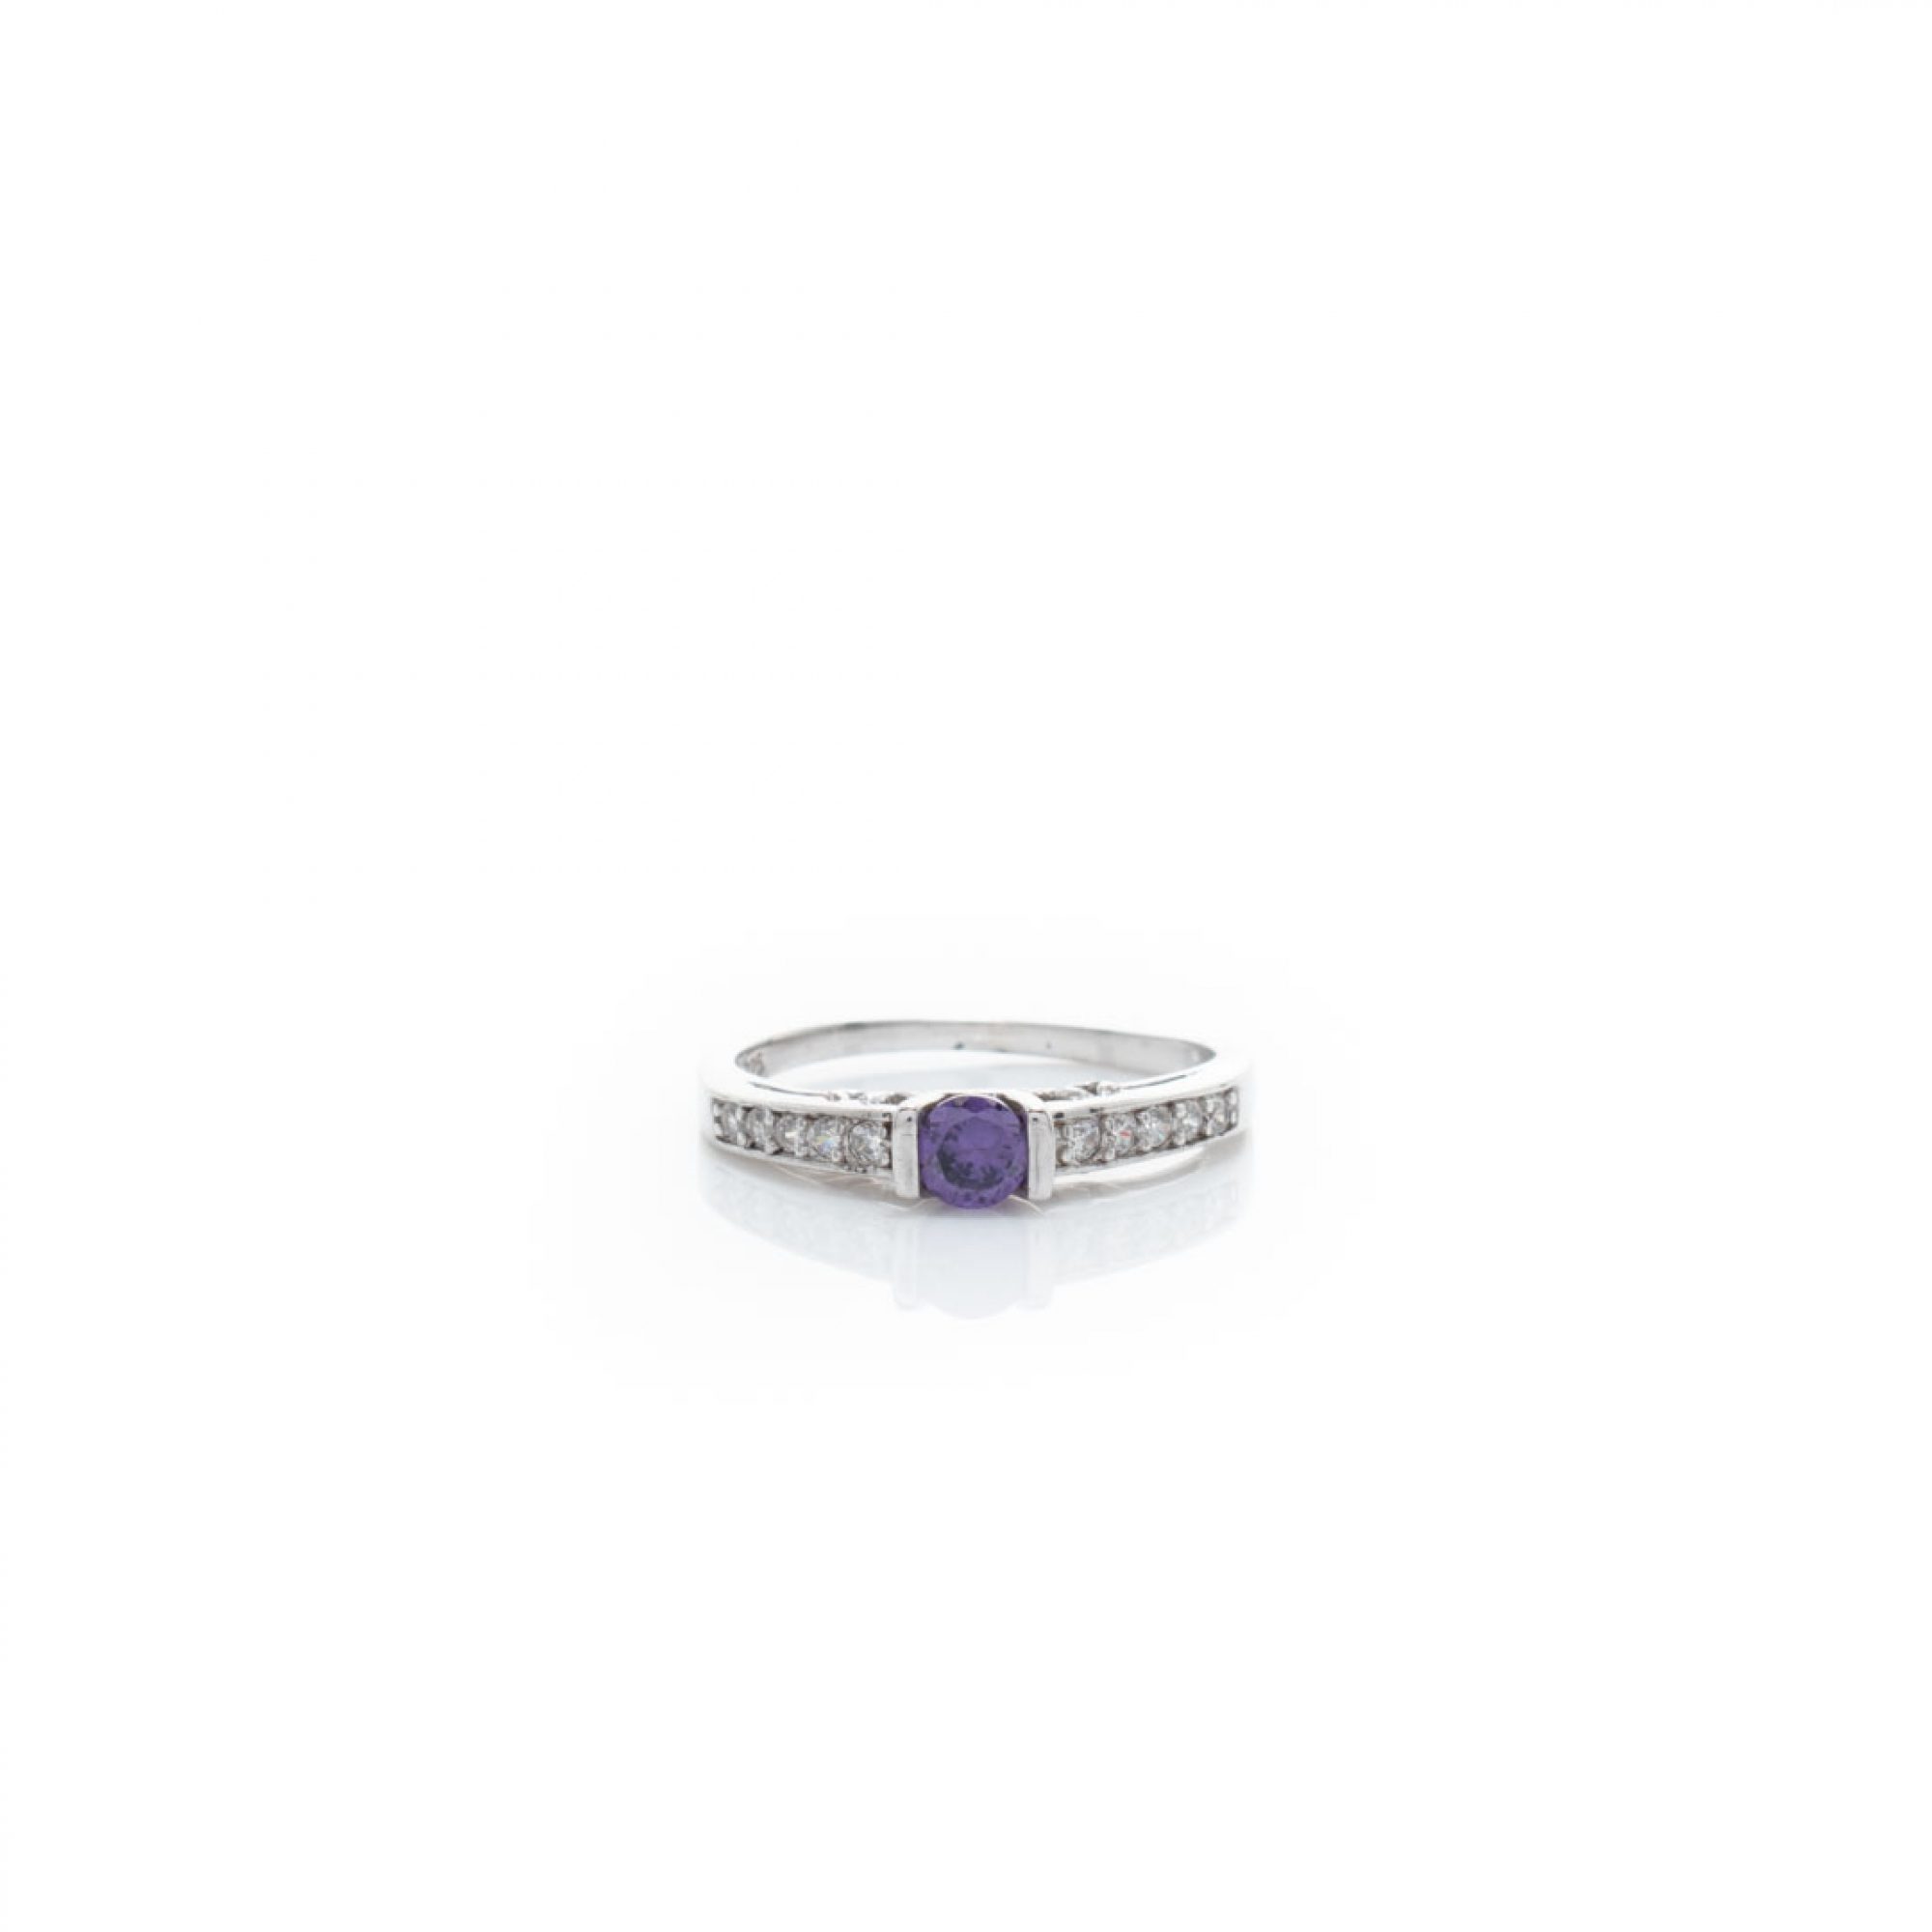 Ring with amethyst and zircon stones